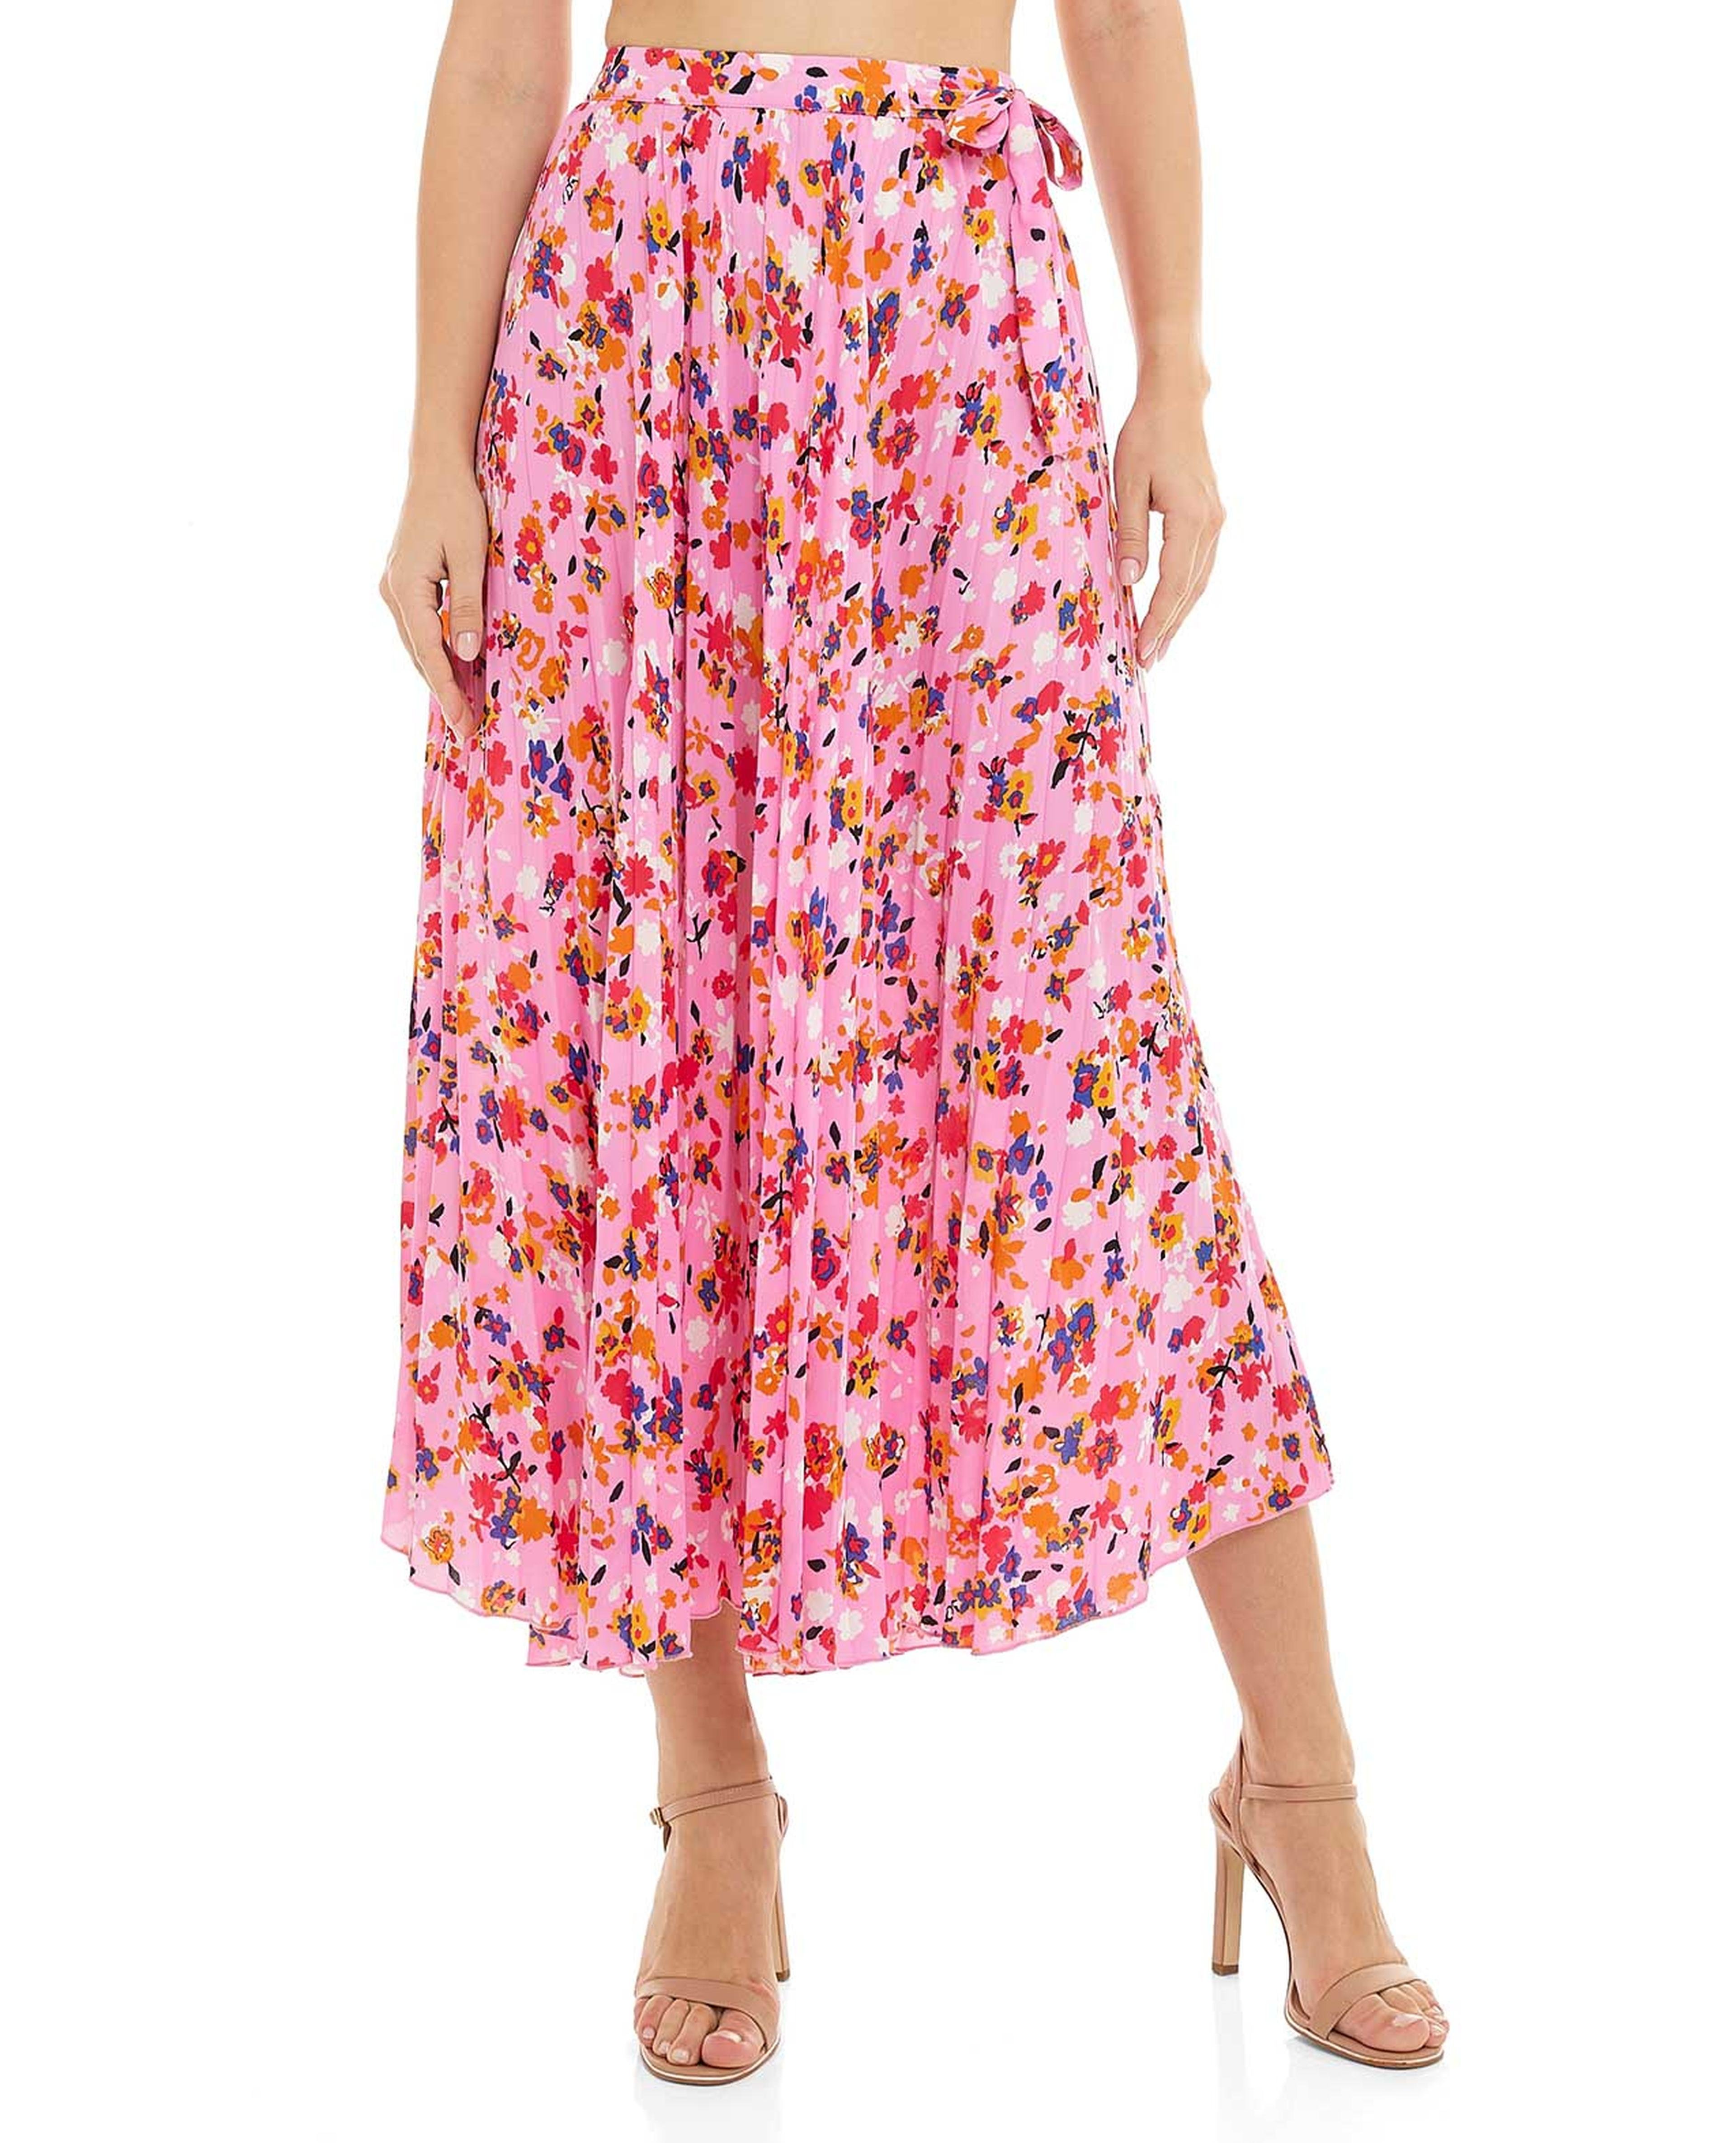 Floral Print Flared Skirt with Elastic Waist